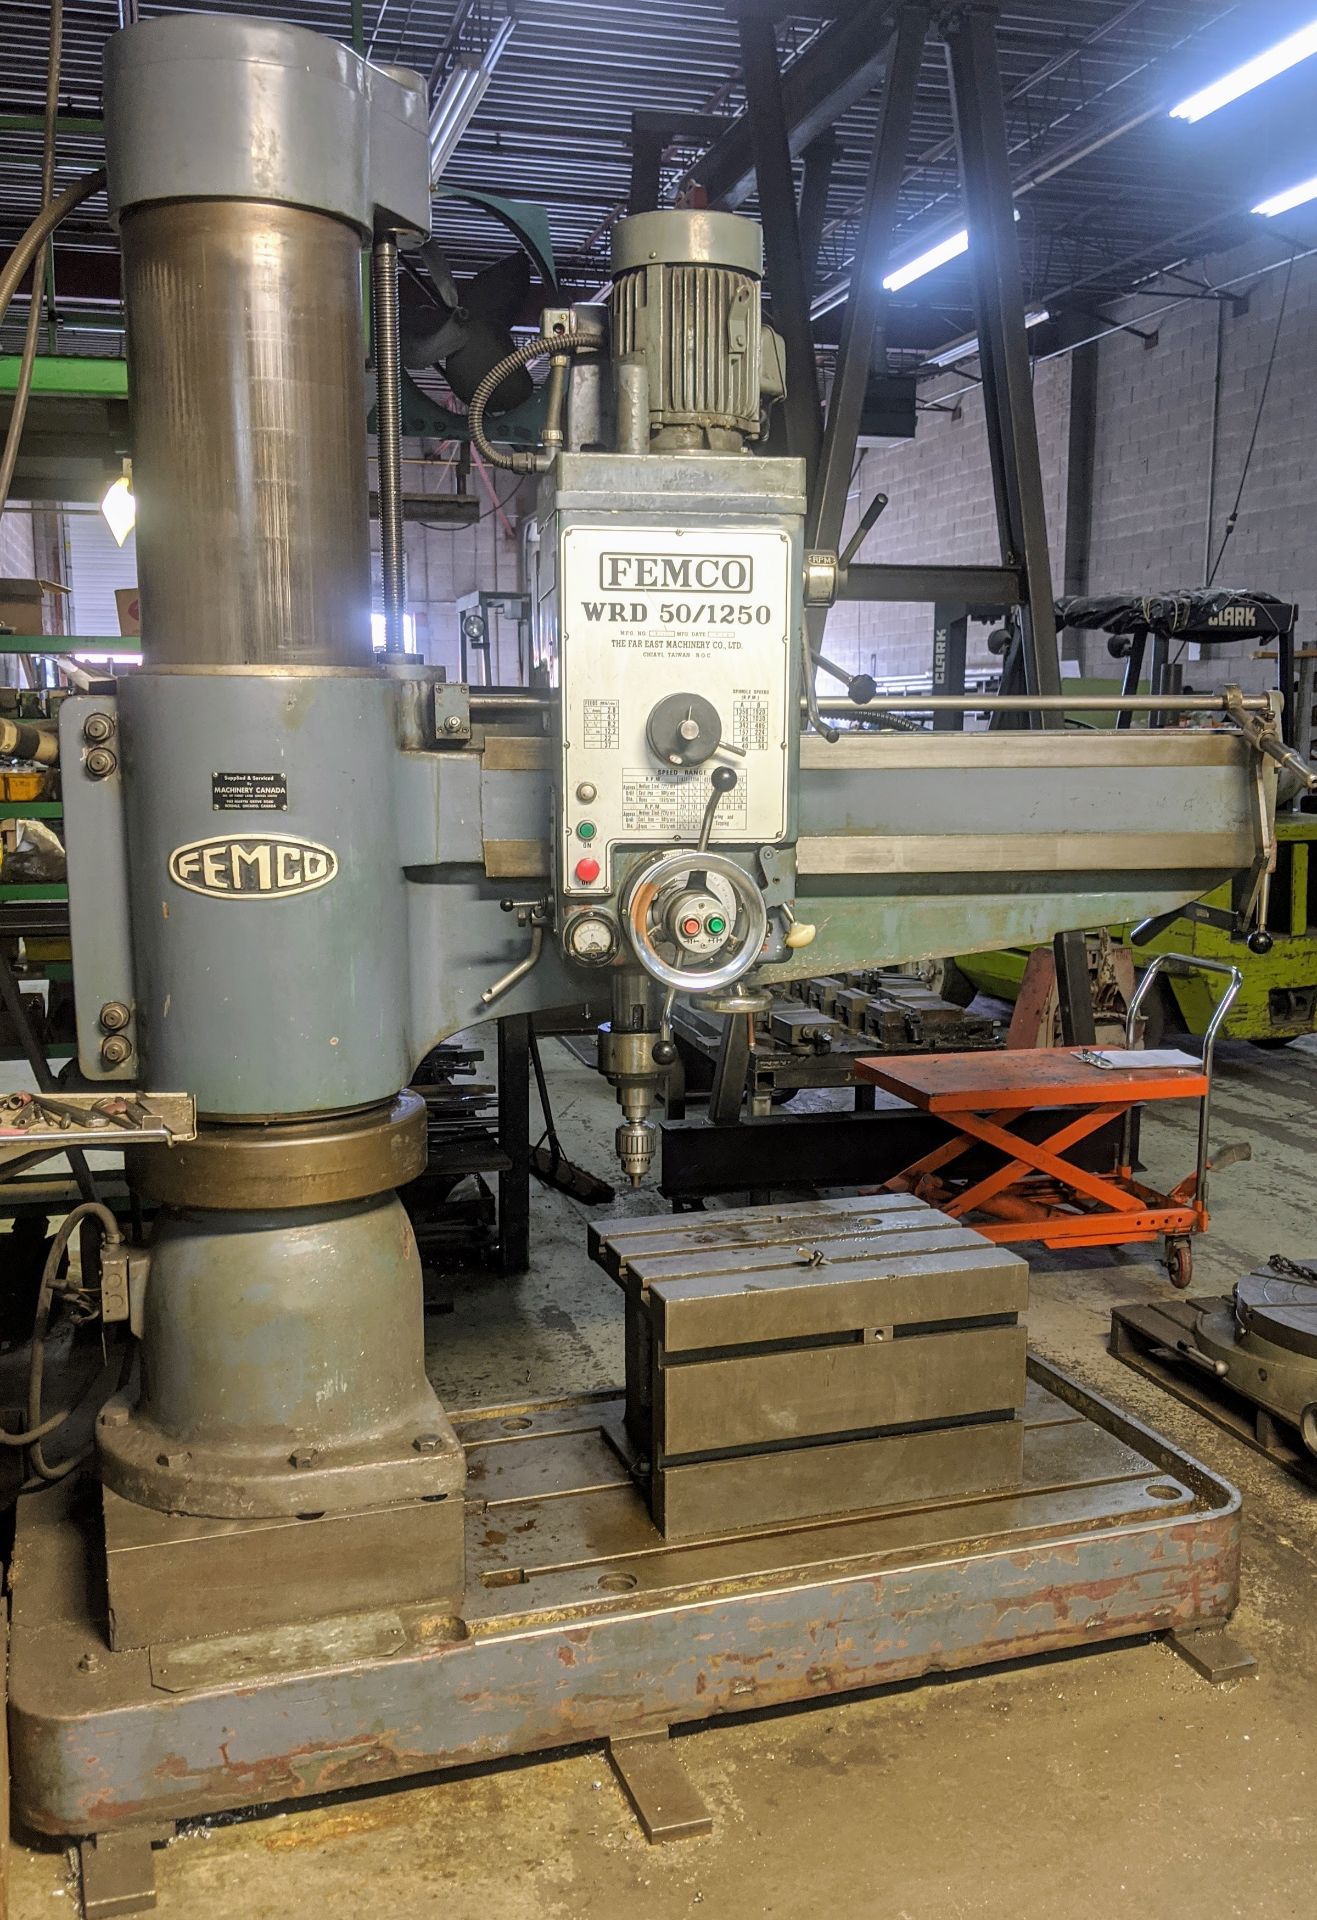 FEMCO WRD 50/1250 Radial Arm Drill, 4’ Arm, 1,920 RPM, s/n 79-4065 - Image 3 of 6